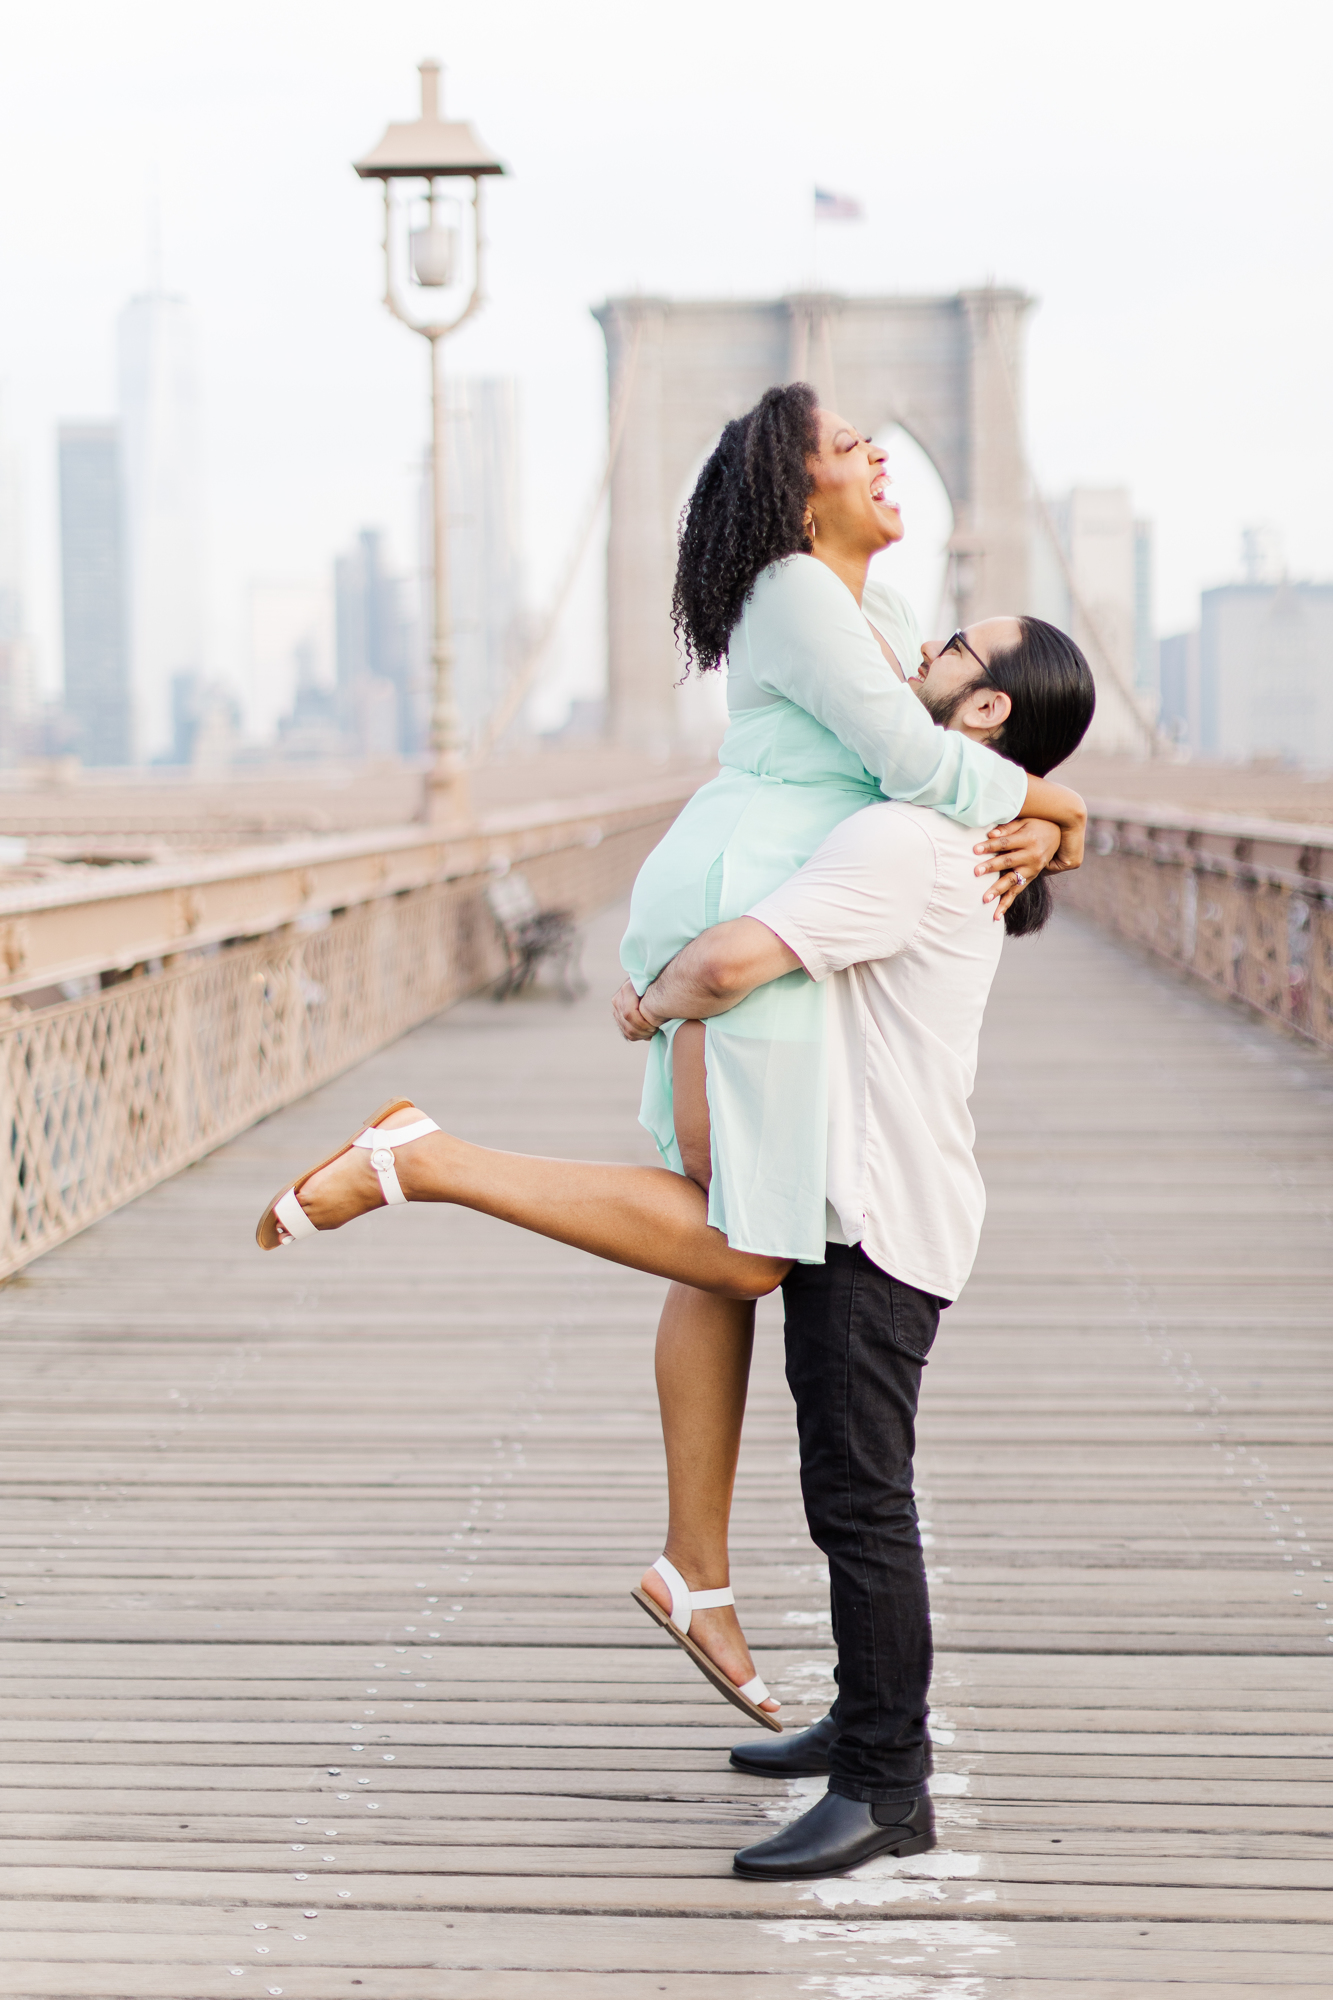 Breath - Taking Summer Engagement Photo Shoot in New York